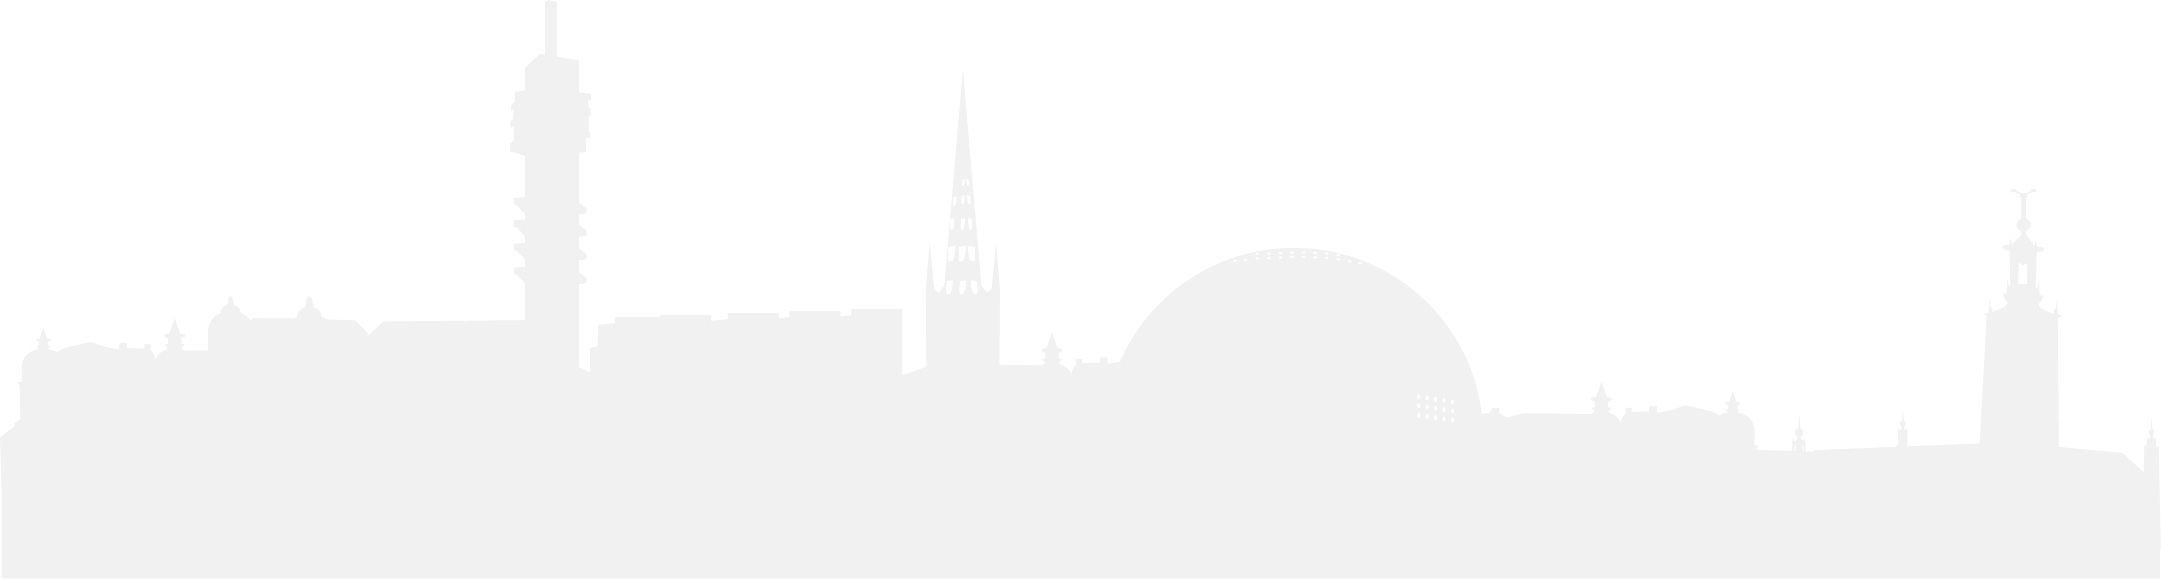 town_silhouette